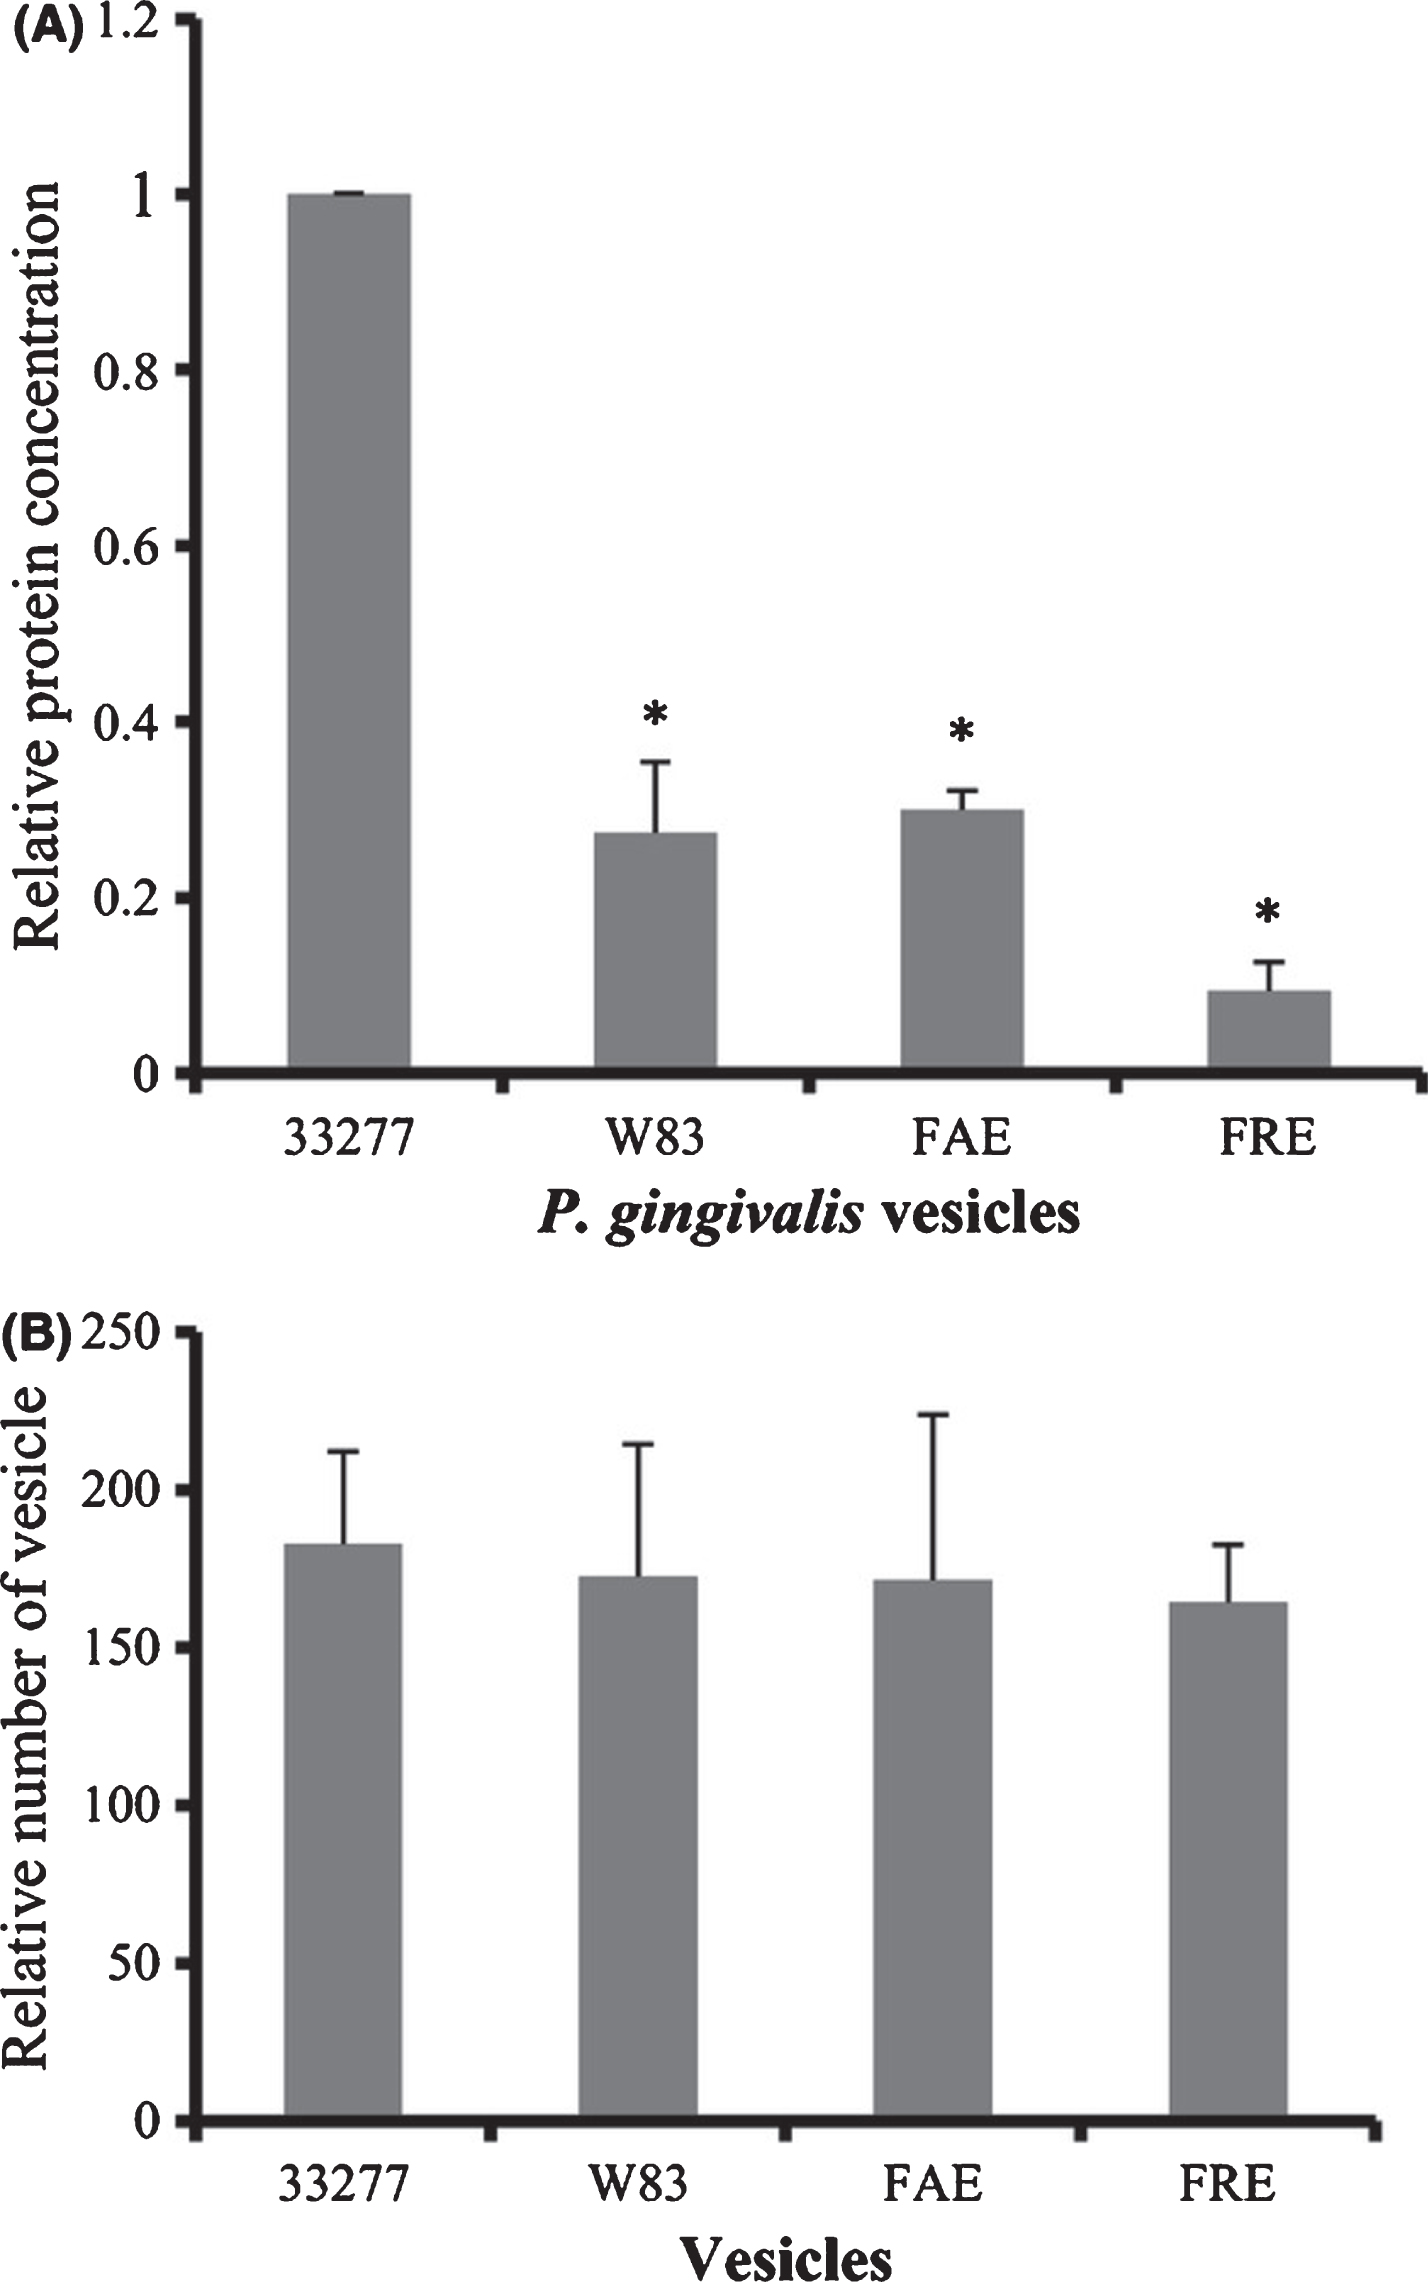 Expression of Hgp44 and FimA protein in P. gingivalis vesicles. A) Levels of FimA and Hgp44 of gingipains in surface extracts (SE) of Pg33277 or an afimbriated strain (W83), and in vesicles (V) of 33277, W83, fimAmutant (FAE), and fimRmutant (FRE) were analyzed using western blot analysis with rabbit anti-FimA or rabbit anti-Hgp44 sera. Reprinted with permission from Mantri CK, Chen CH, Dong X, Goodwin JS, Pratap S, Paromov V, Xie H (2015) Fimbriae-mediated outer membrane vesicle production and invasion of Porphyromonas gingivalis. Microbiology Open 4, 53–65, under the terms of the Creative Commons CC BY license.